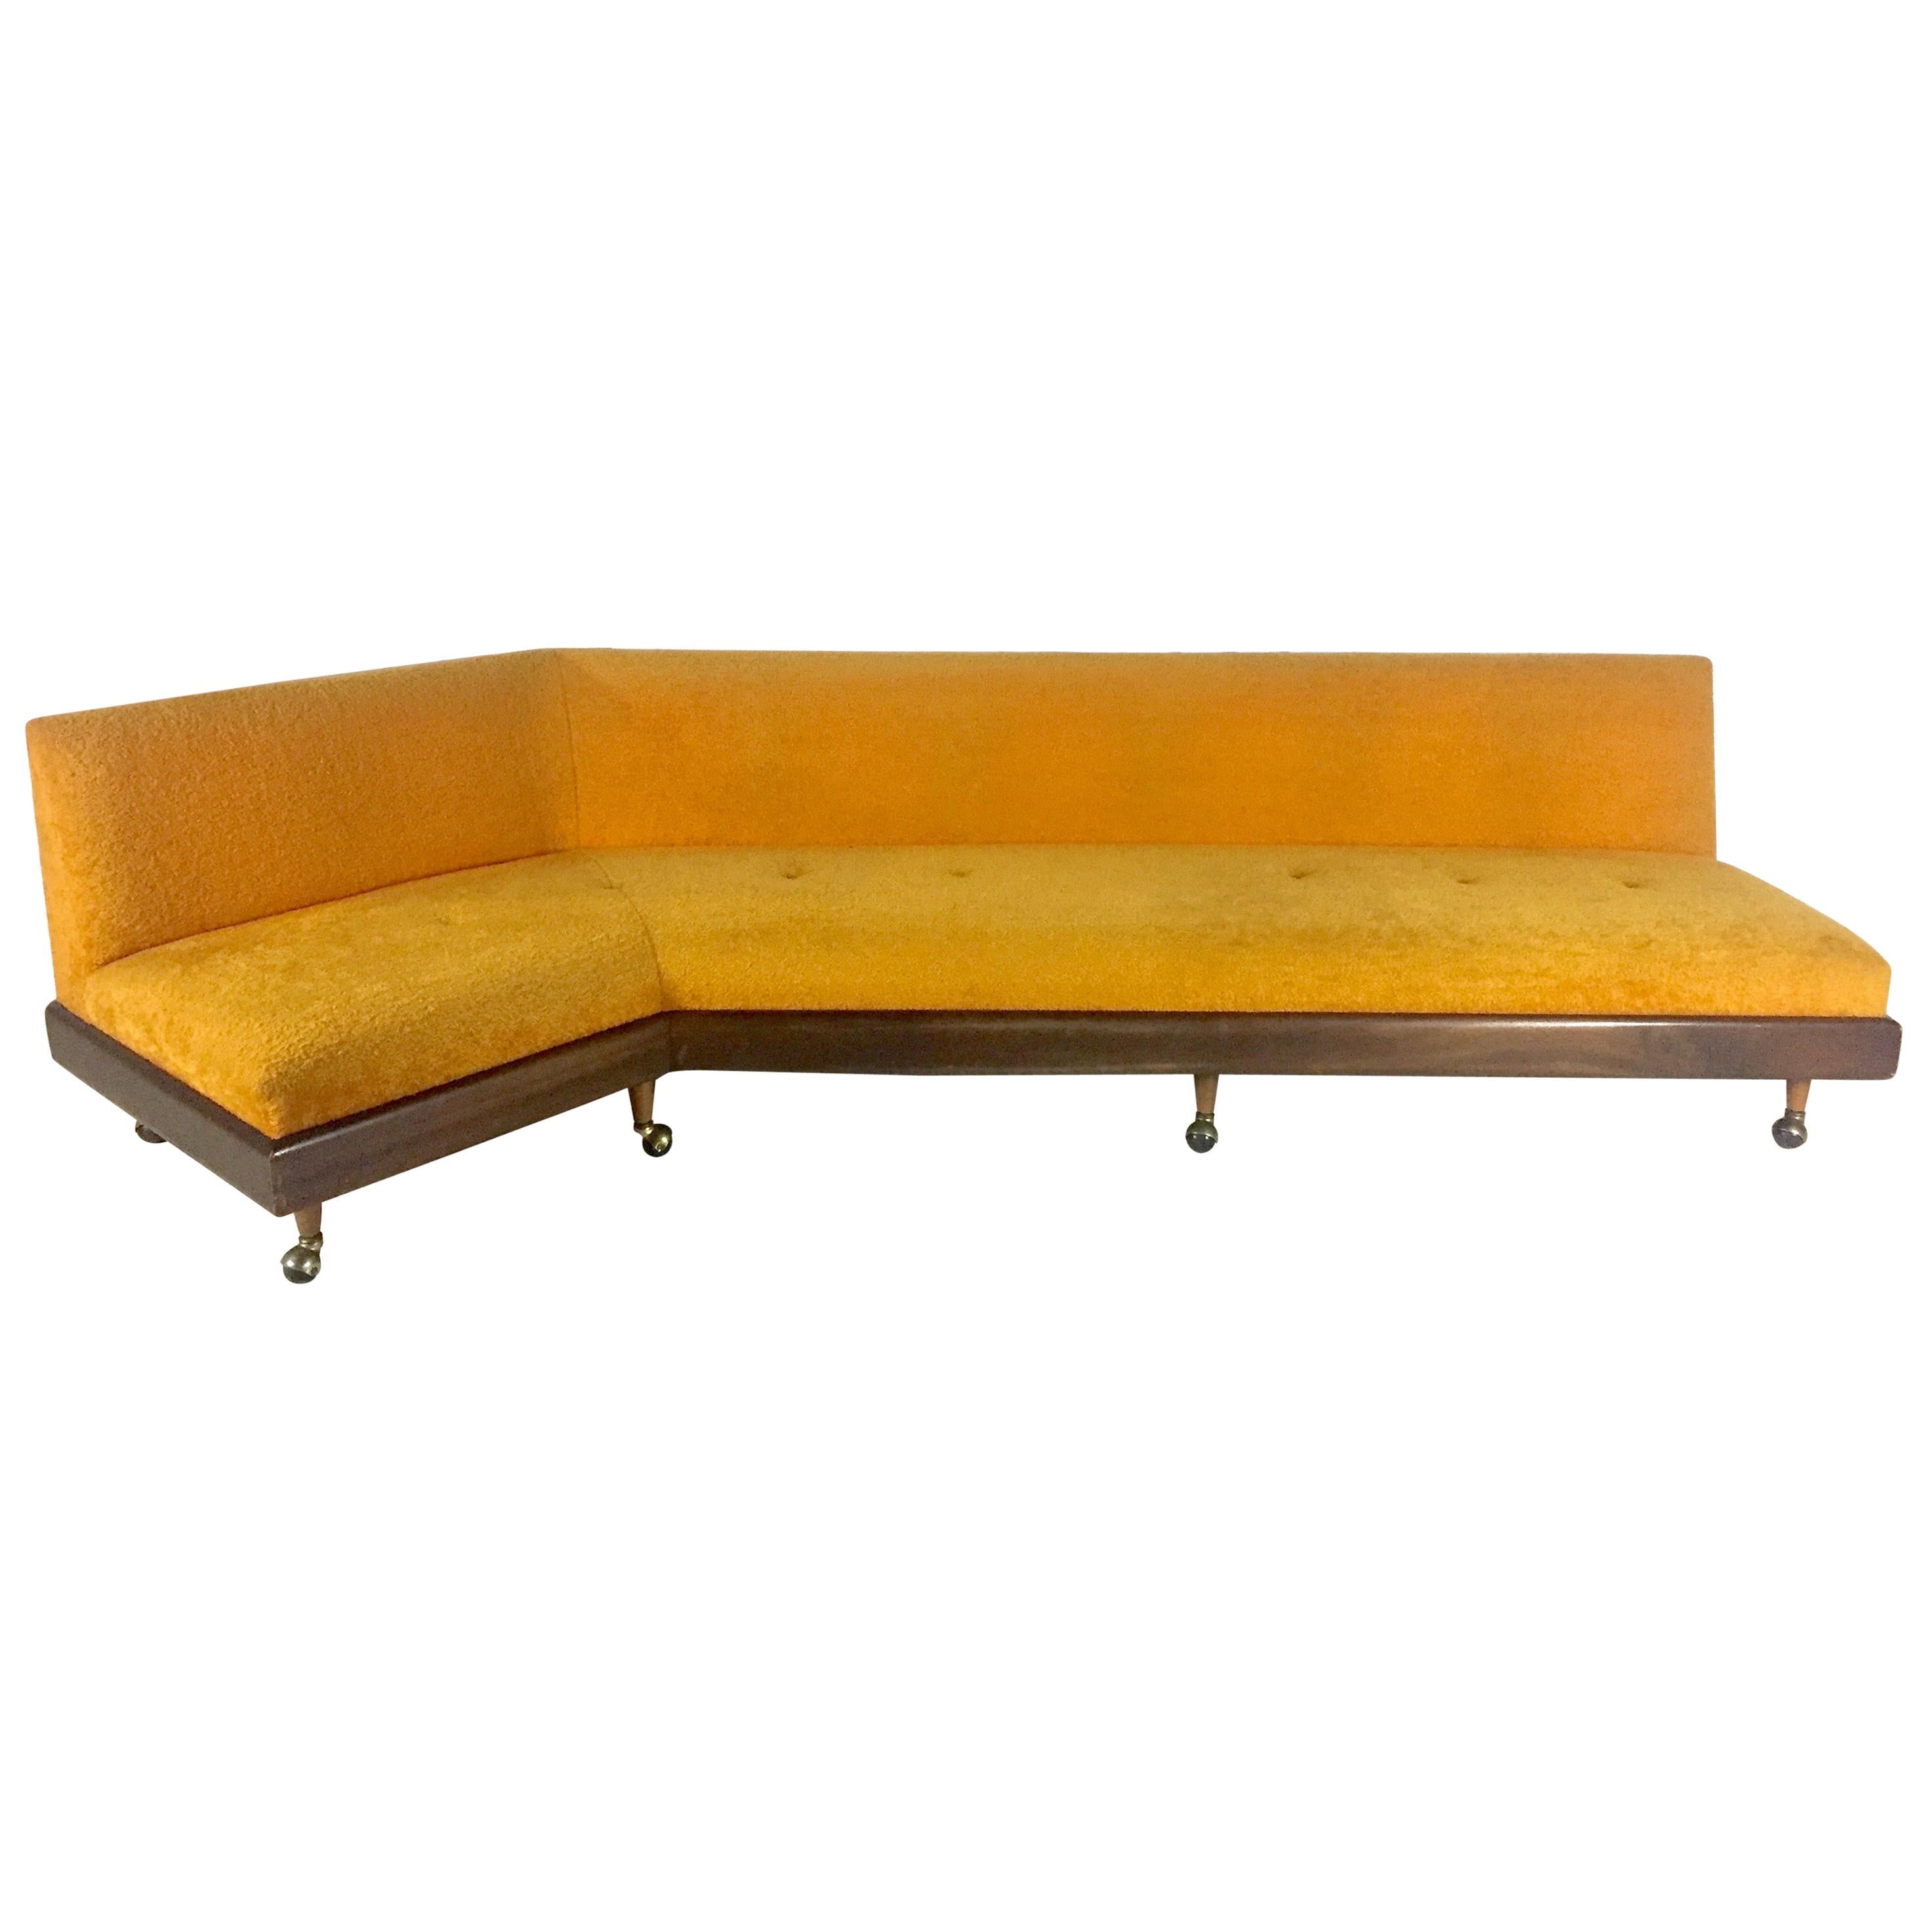 Adrian Pearsall Signed Craft Associates Sofa Midcentury Built-in Cabinet 2167-s